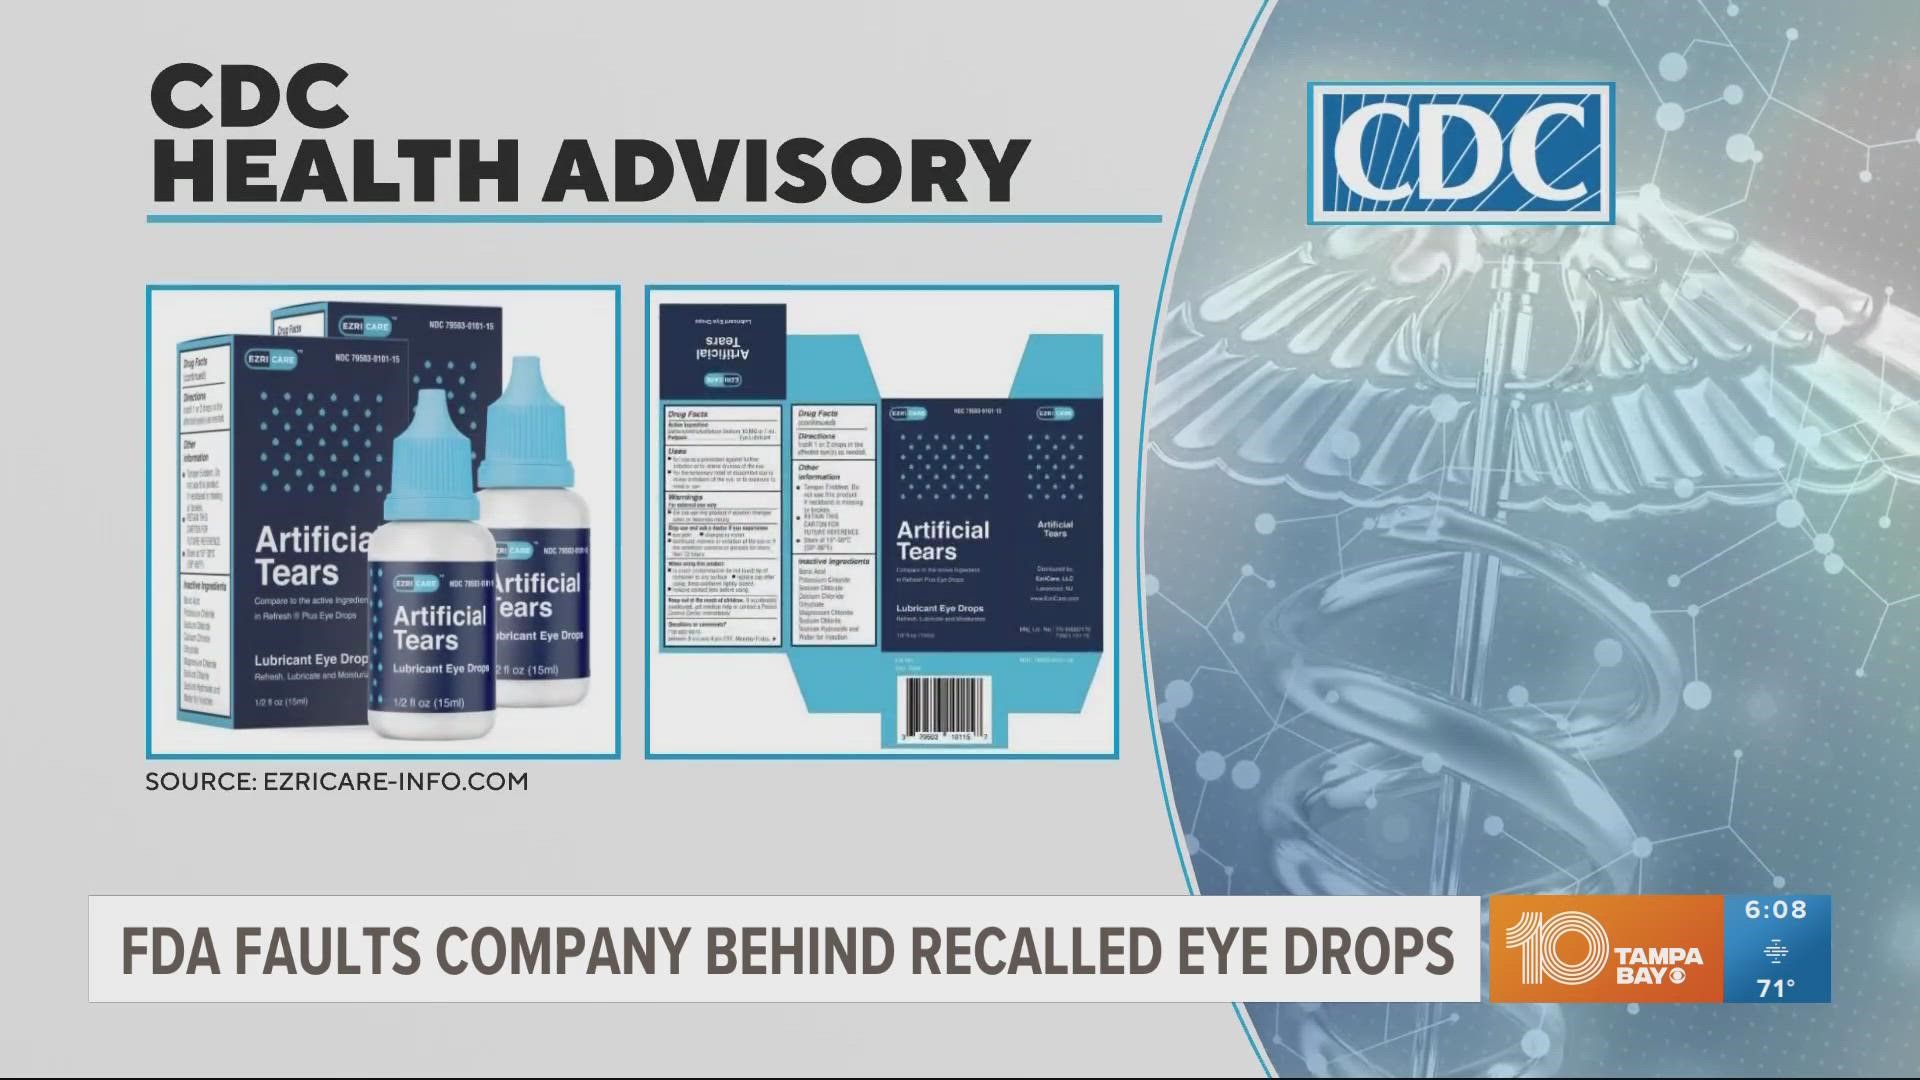 RECALL ALERT Two more eye drops products carry contamination risks